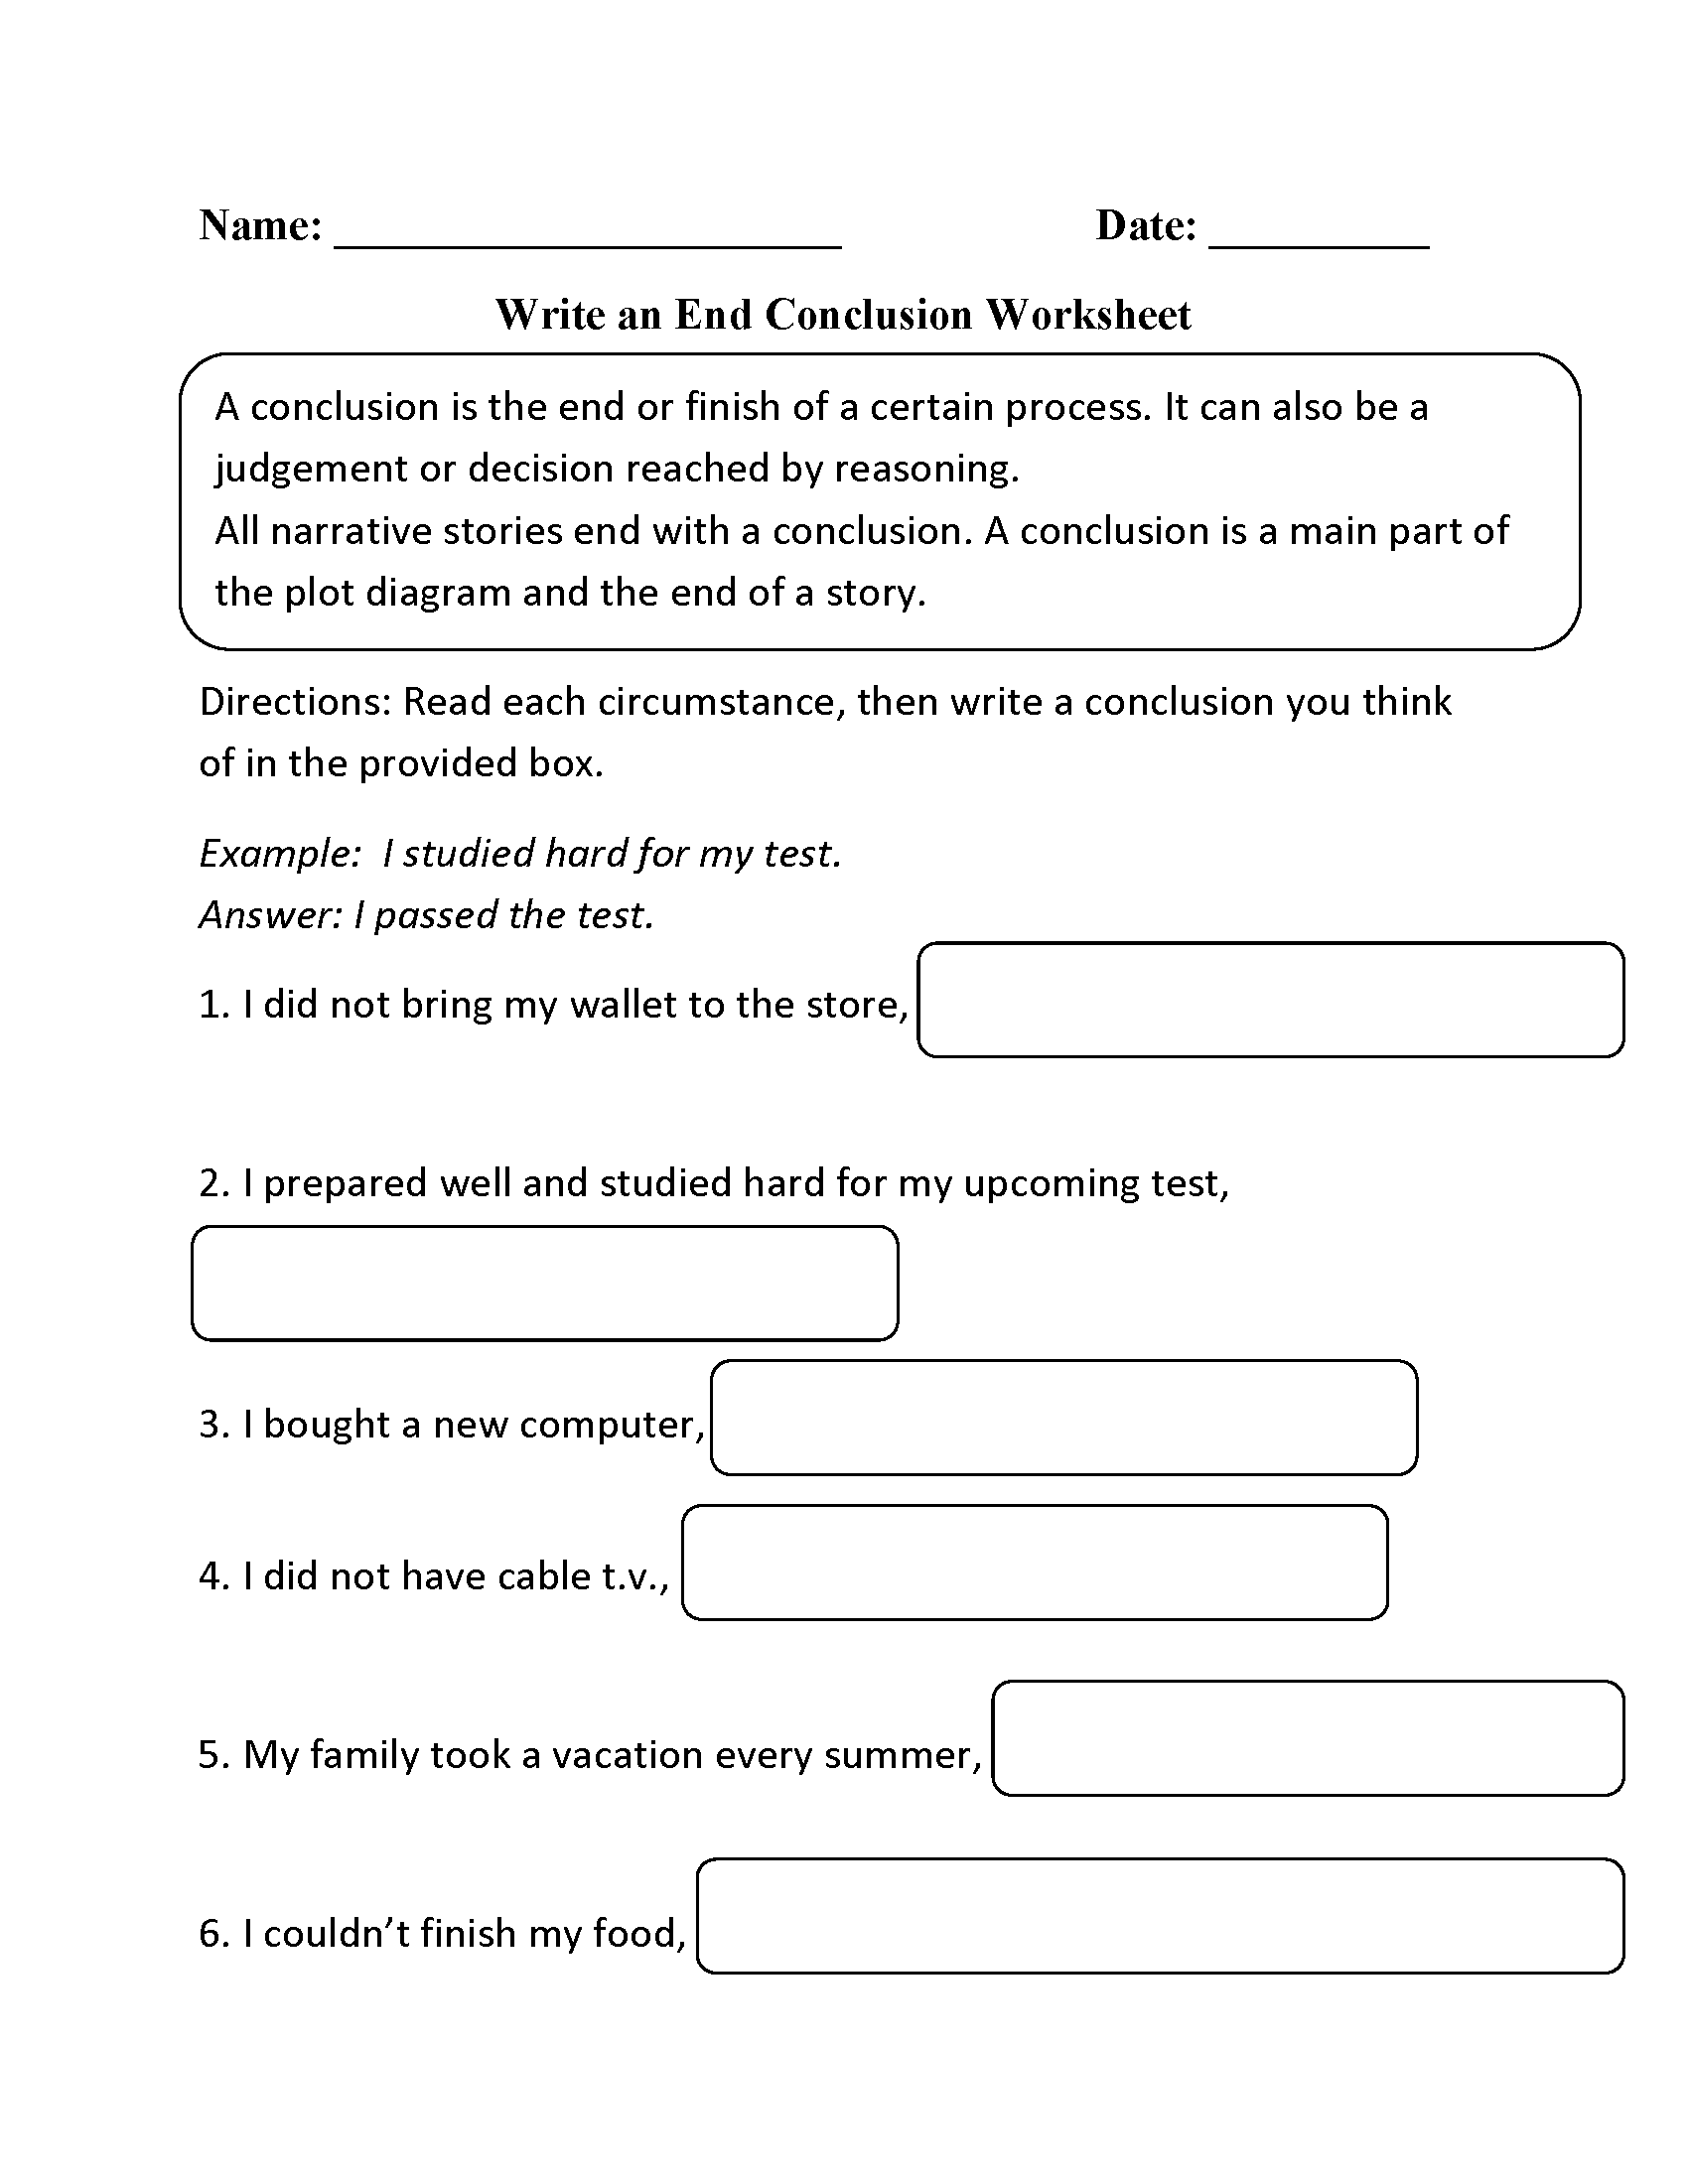 Drawing Conclusions Worksheets 5th Grade Image